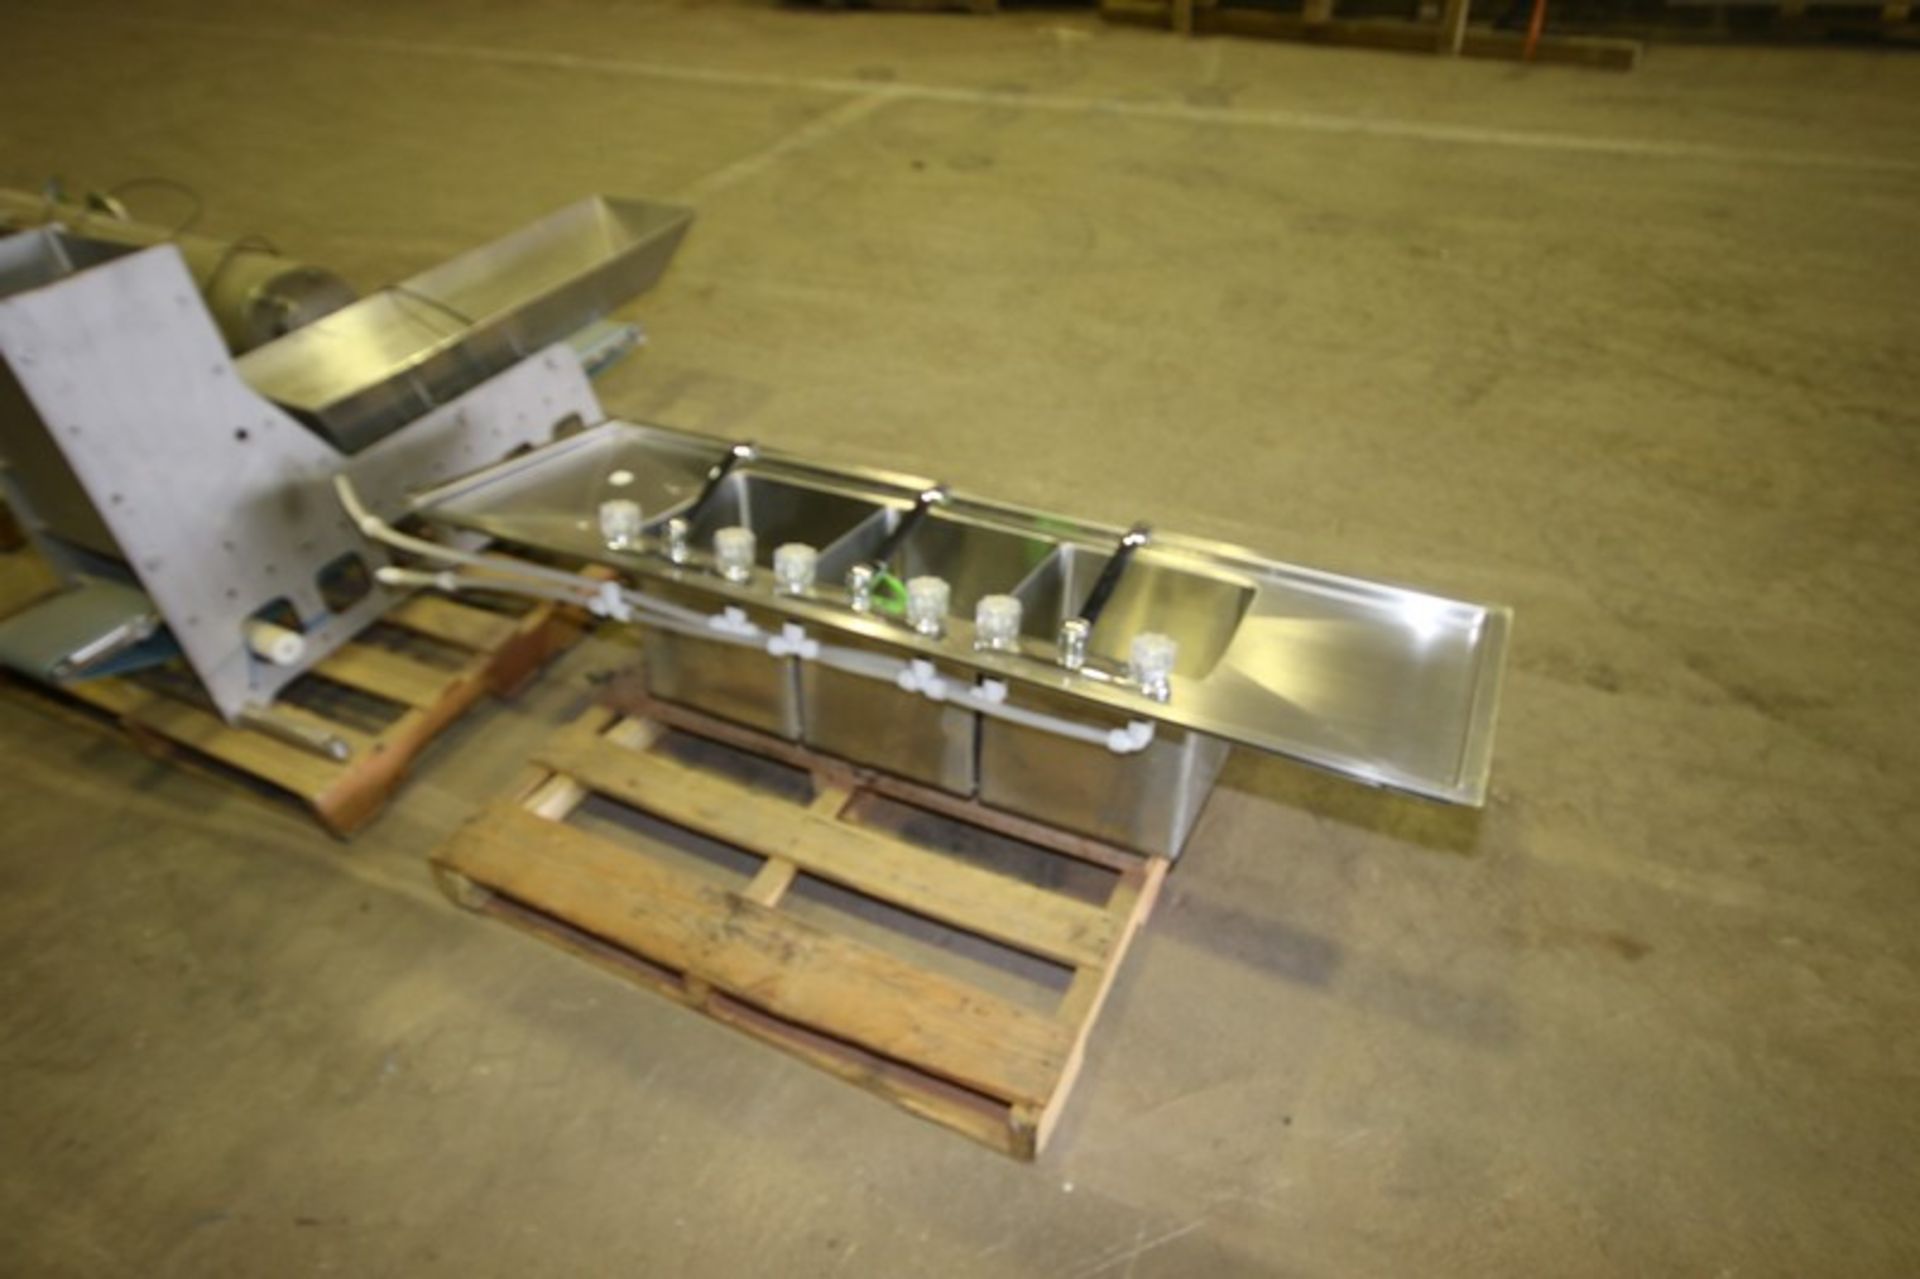 Triple Bowl S/S Sink, Overall Dims.: Aprox. 62" L x 20" W (LOCATED IN MEDFORD, WI) (Rigging, Loading - Image 2 of 2